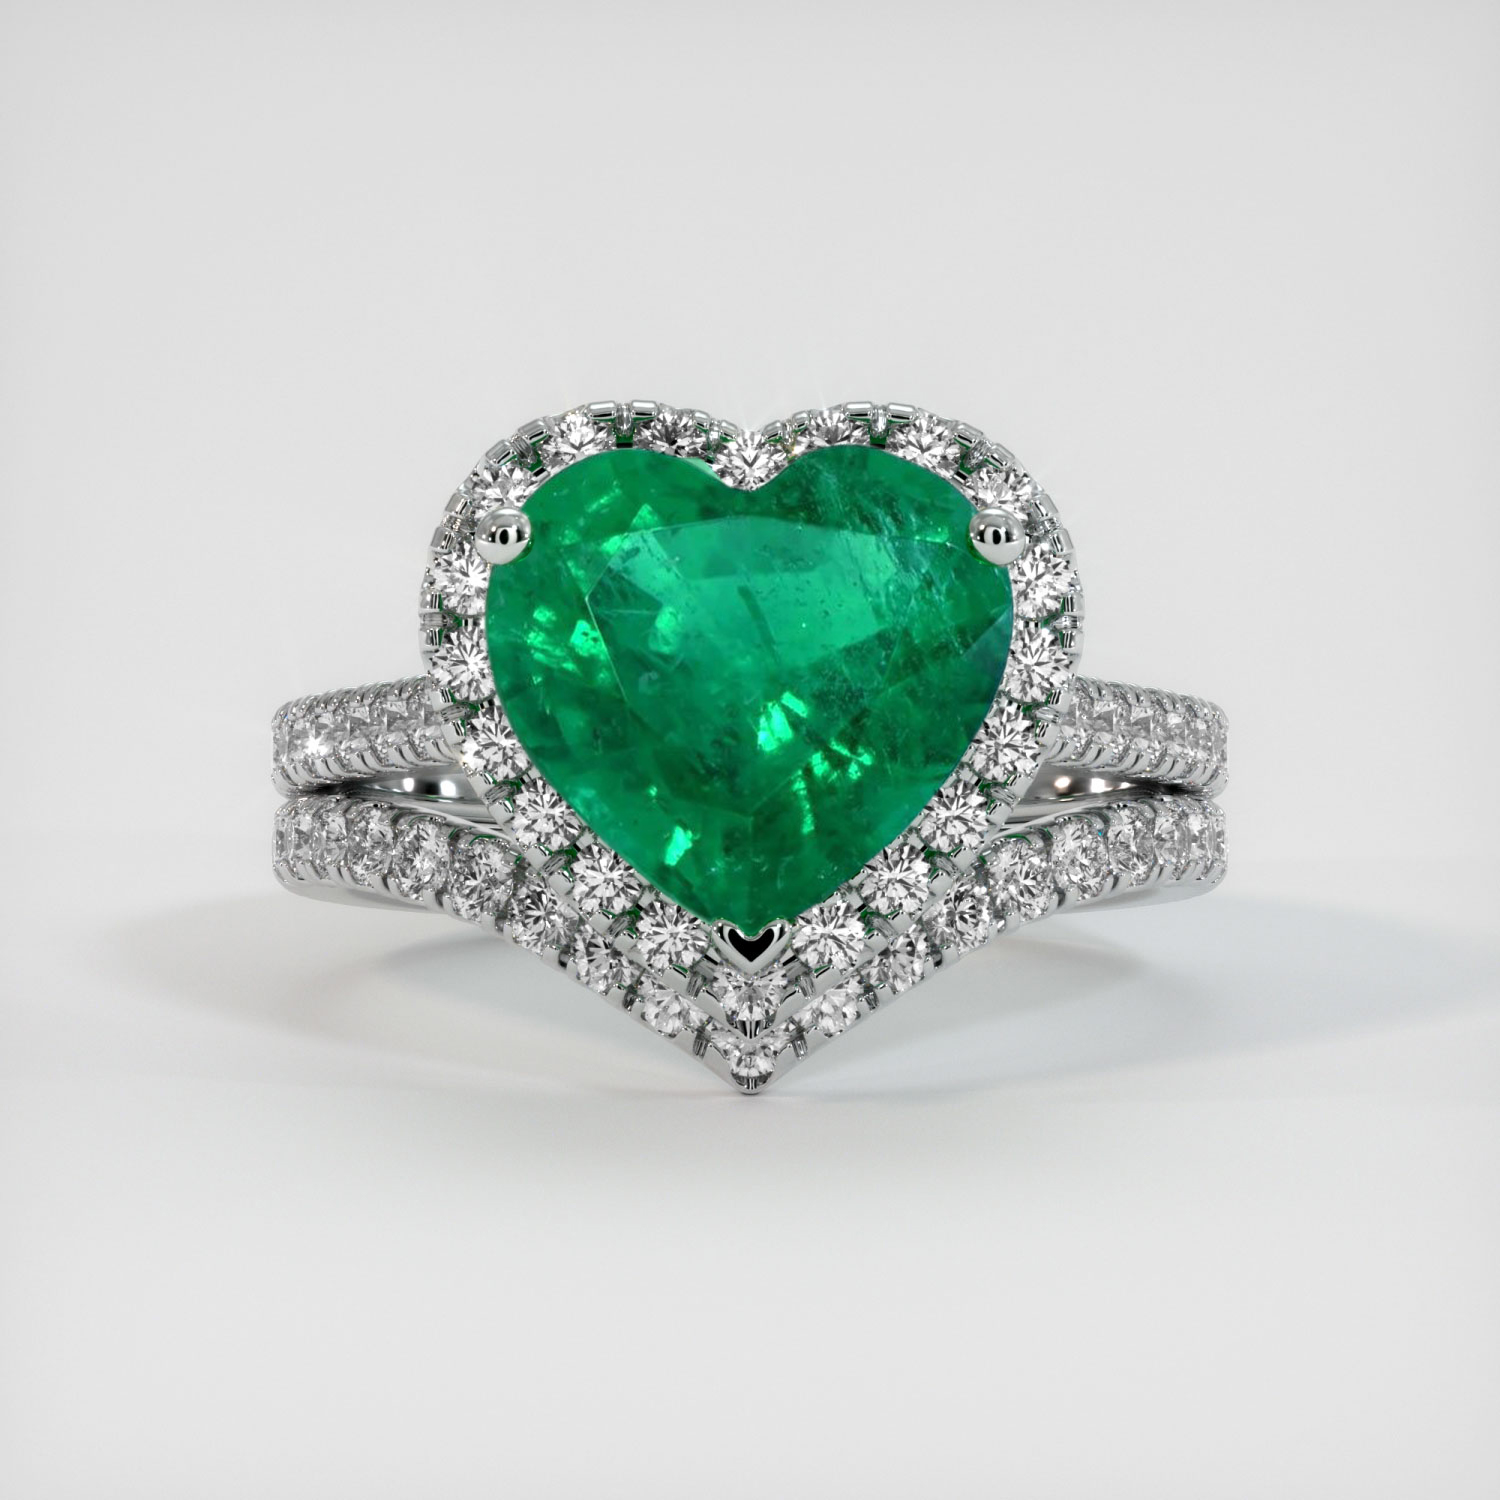 Emerald Ring 3.01 Ct. 18K White Gold | The Natural Emerald Company